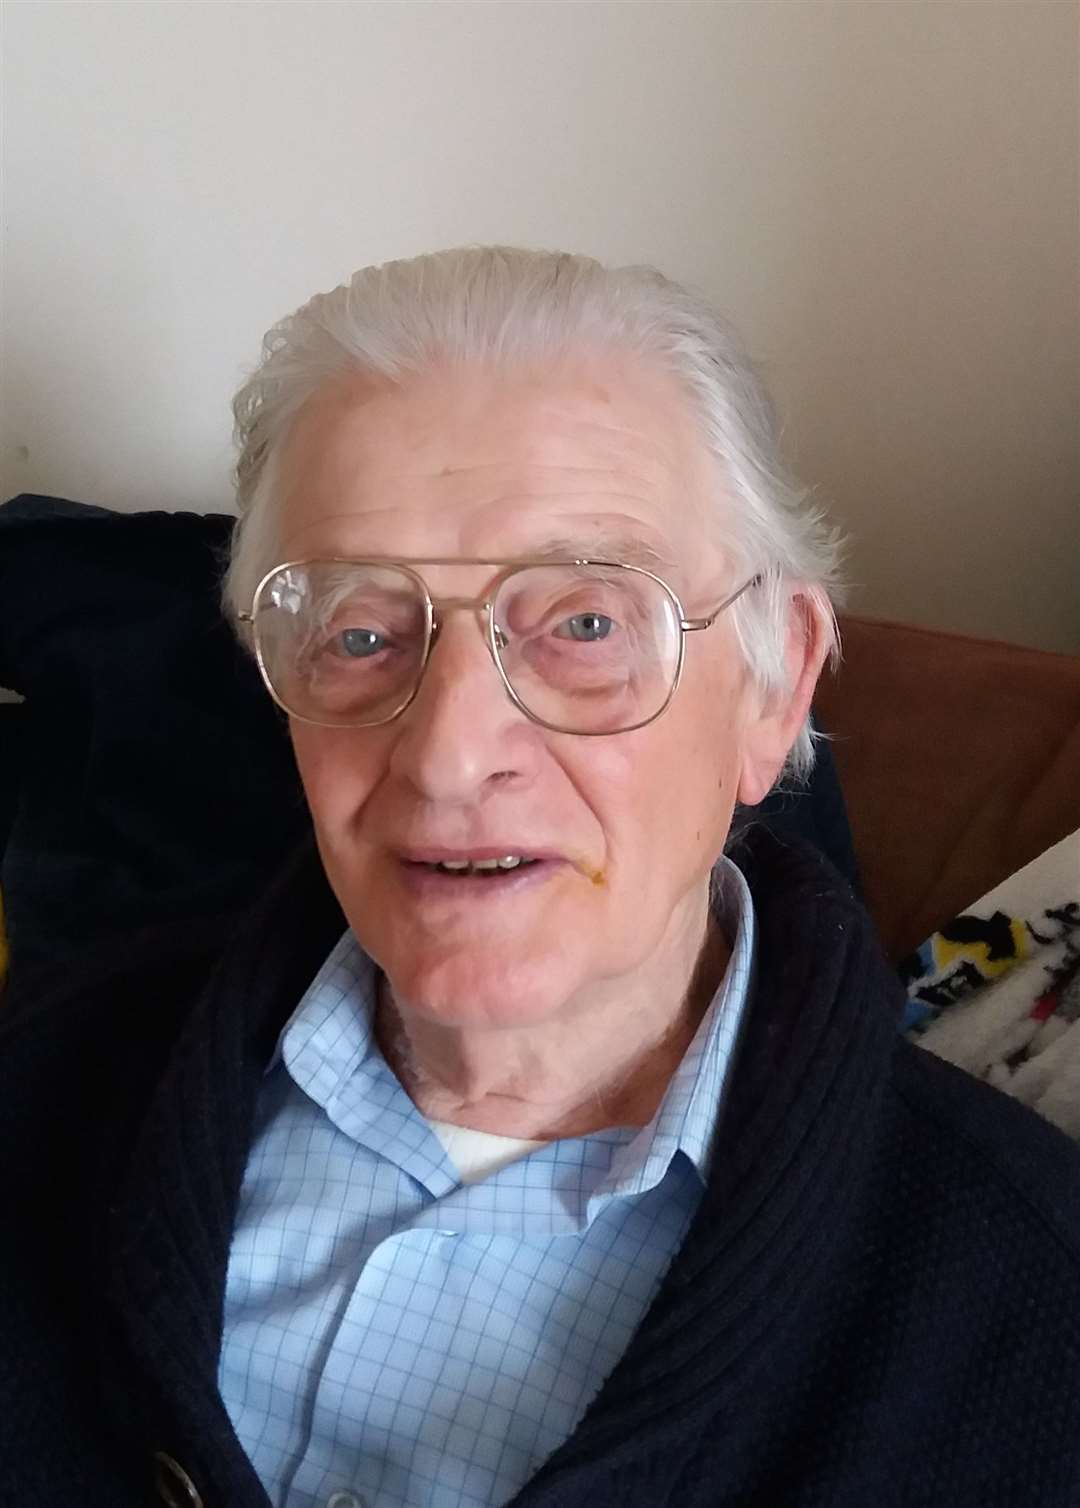 Patrick Clements, 93, from Snodland, was told by Milk & More he had to get an online account, or lose his deliverly Picture: Jane Wan